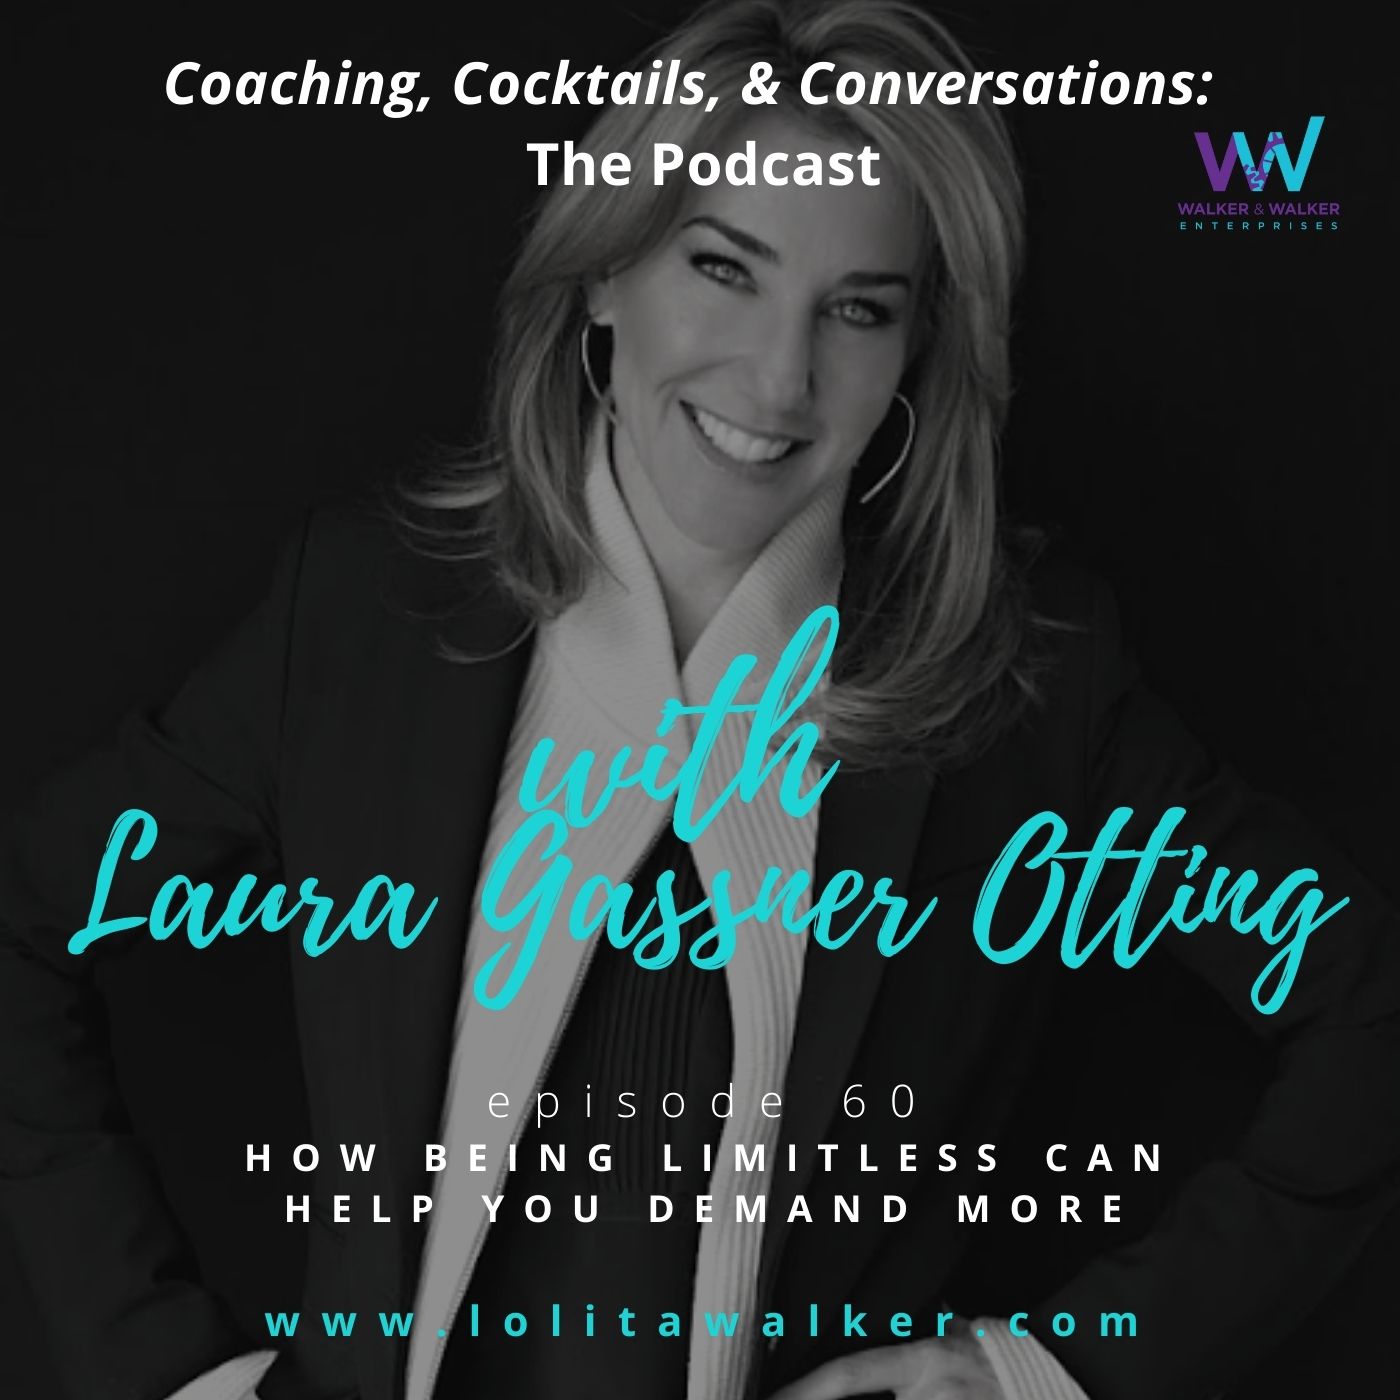 S3E60 - How Being Limitless Can Help You Demand More (with Laura Gasner Otting)